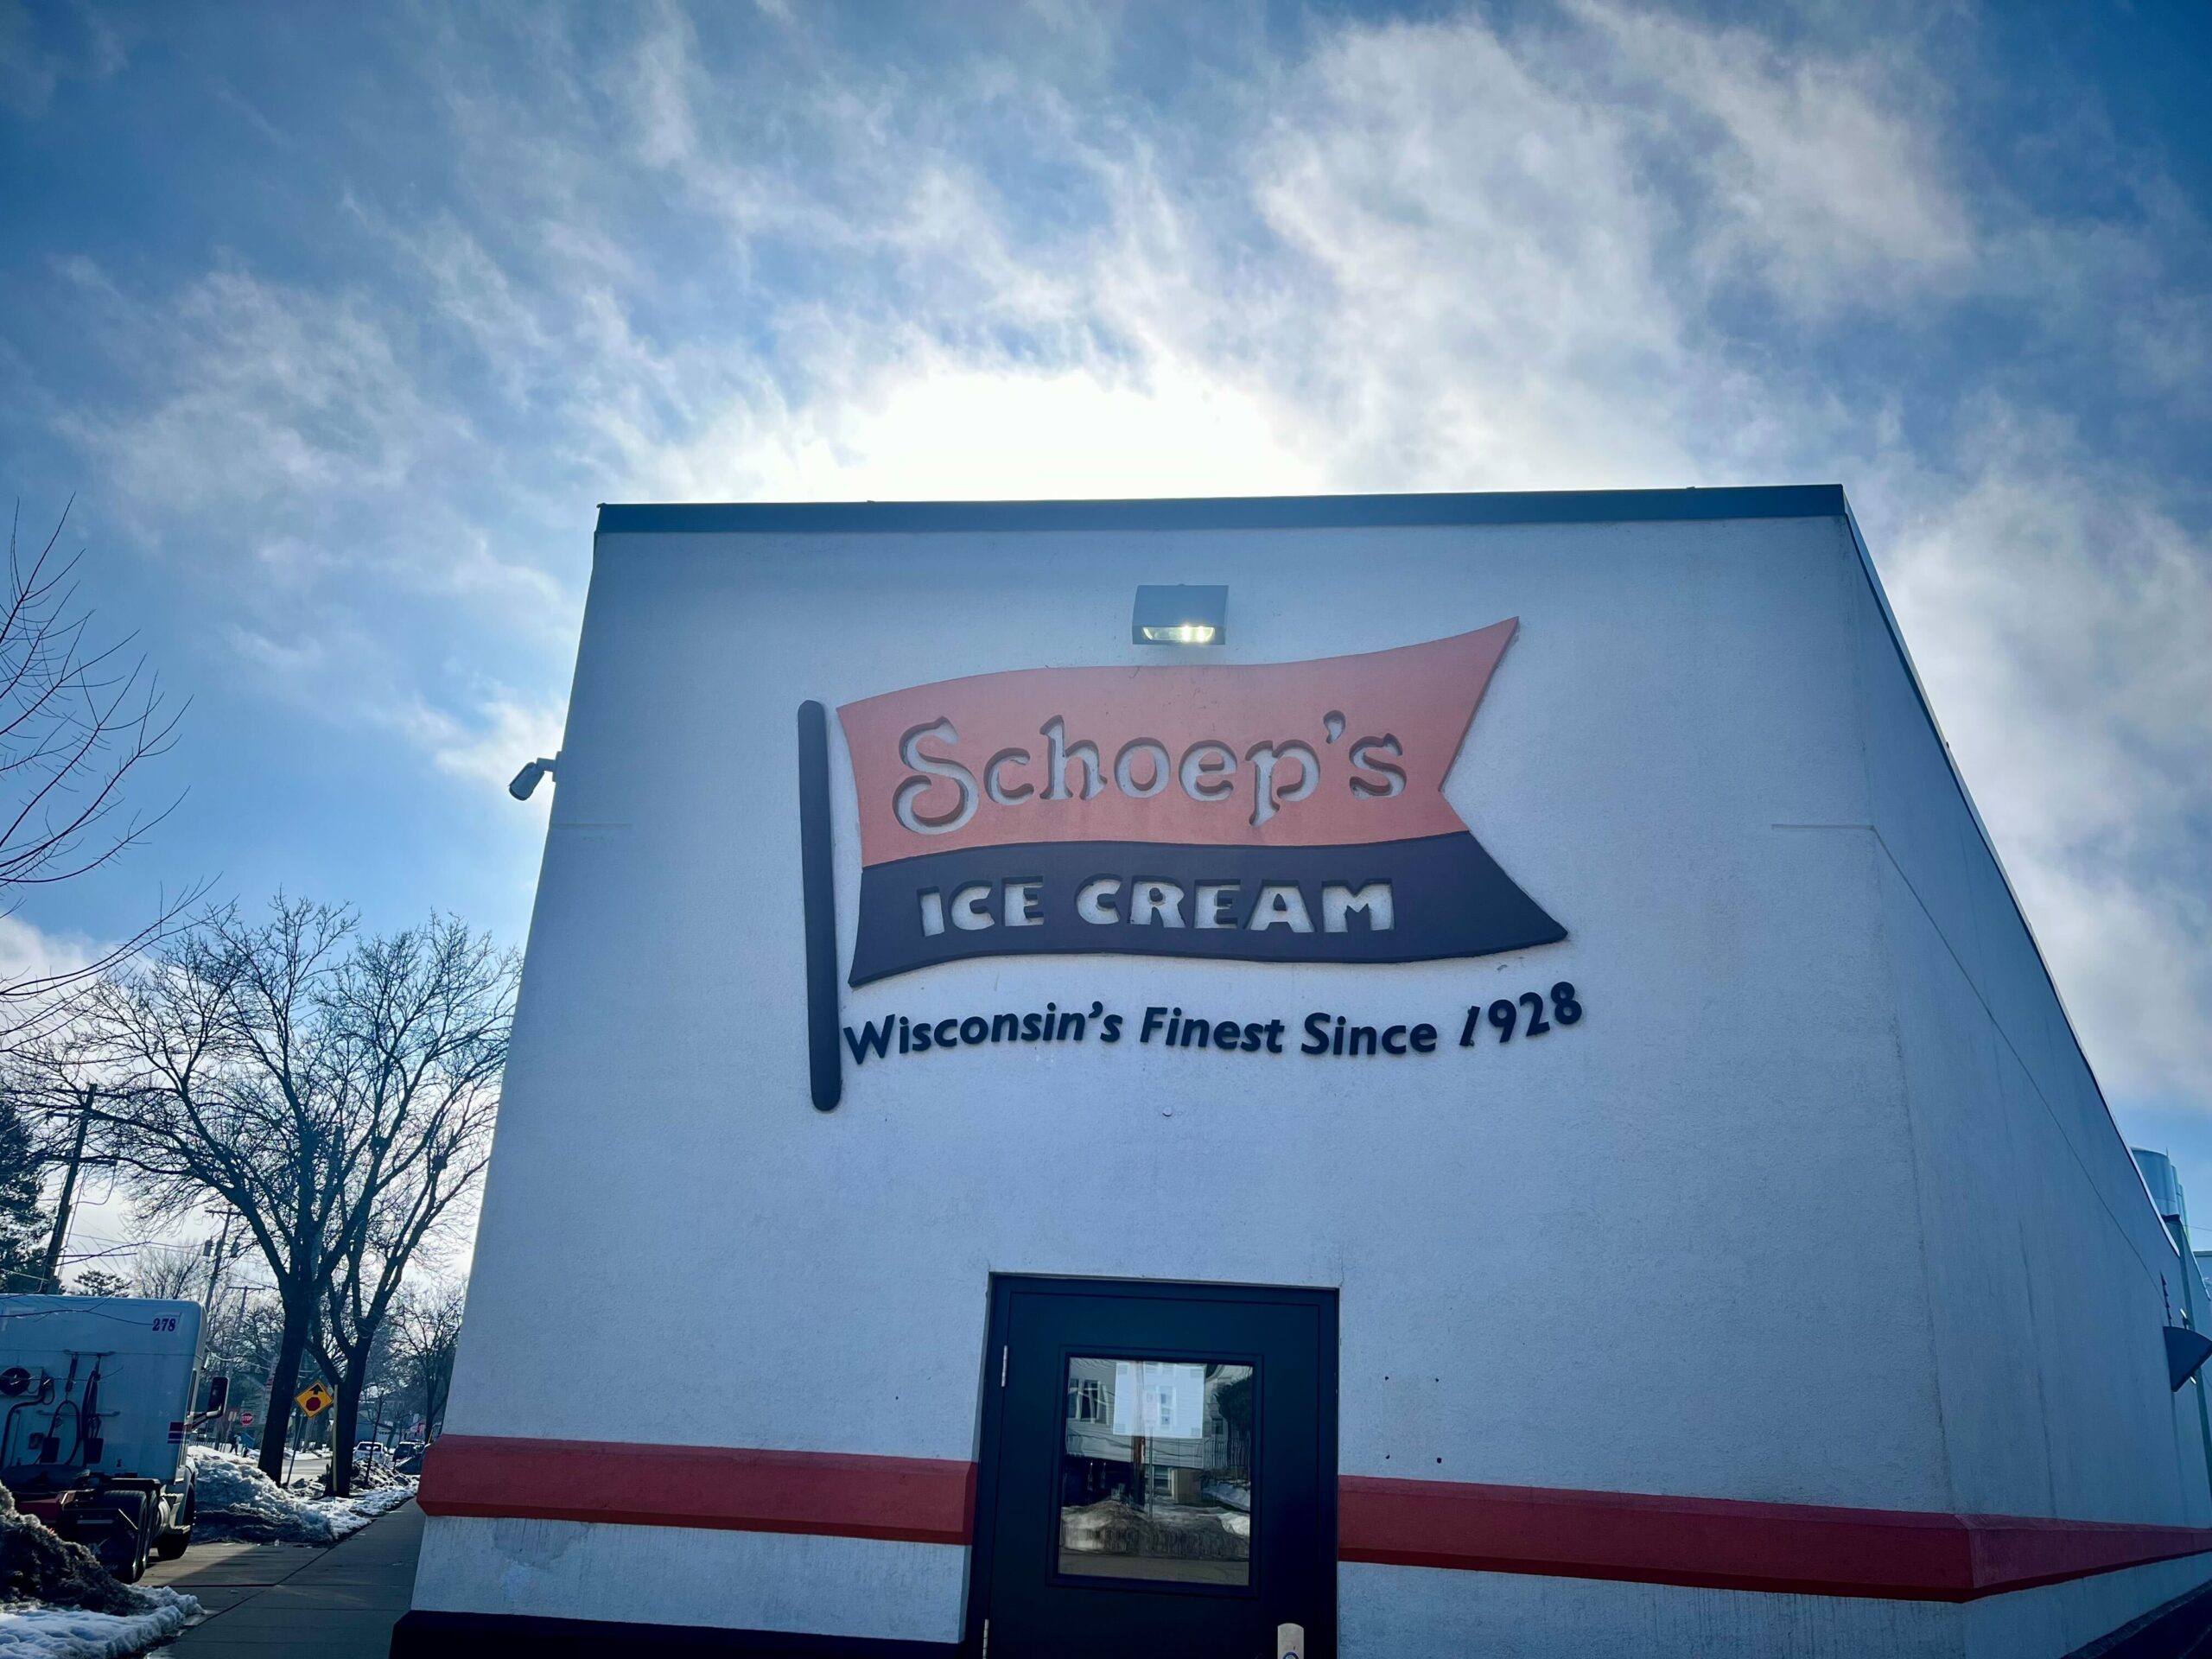 The front of Schoep's ice cream factory -- an orange and brown sign on a white building, against a sunny winter sky.